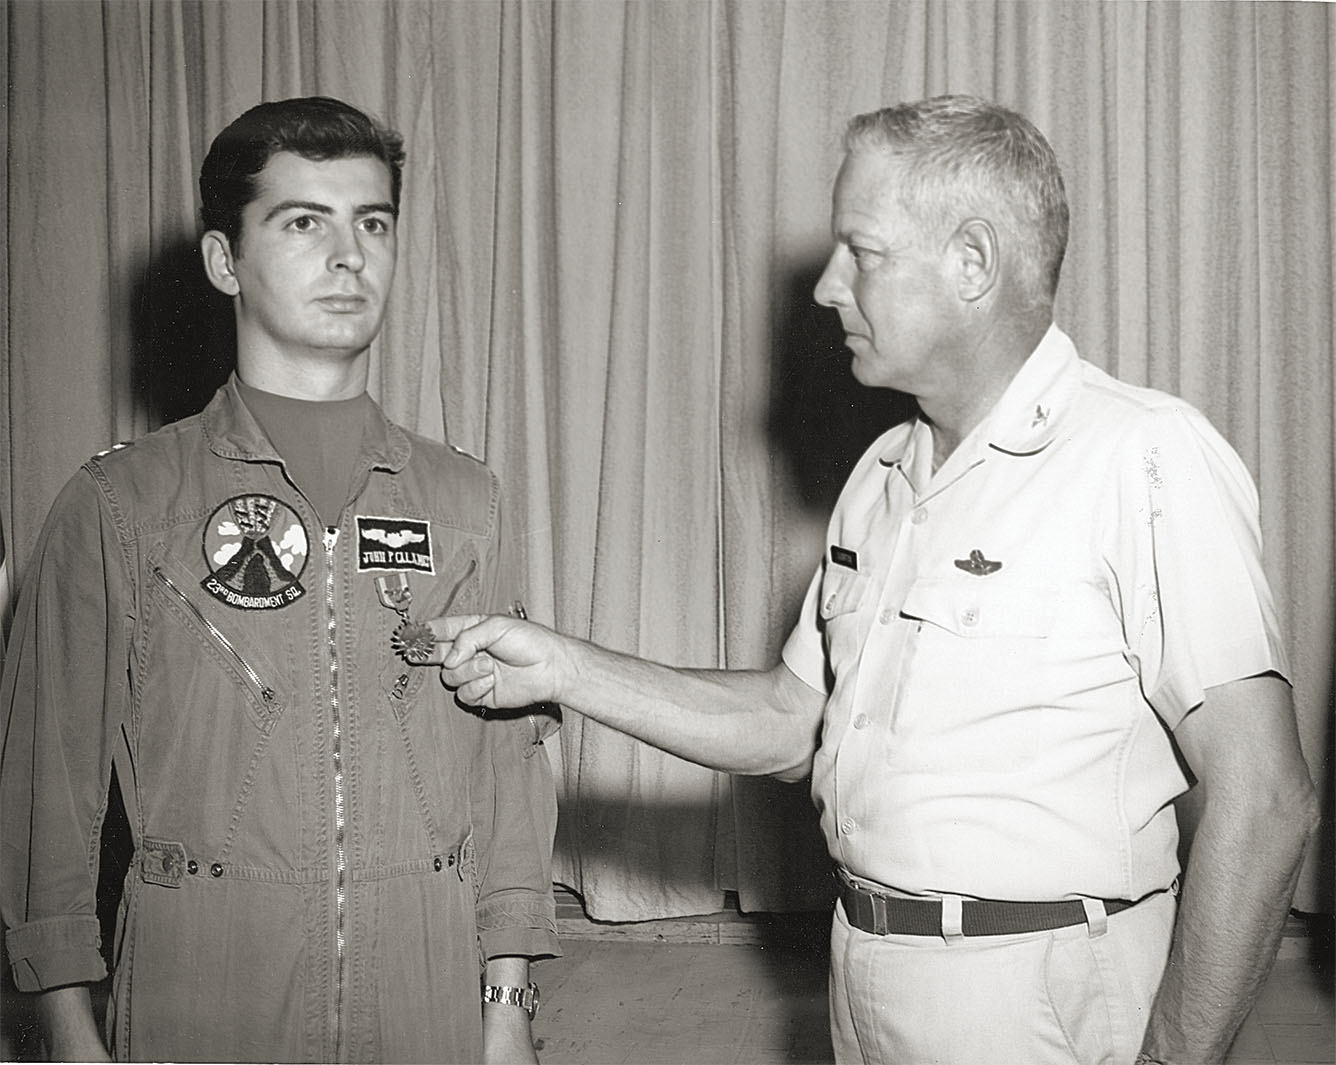 Calamos, who flew B-52s with the 23rd Bombardment Squadron in the U.S., receives an Air Medal. / U.S. Air Force